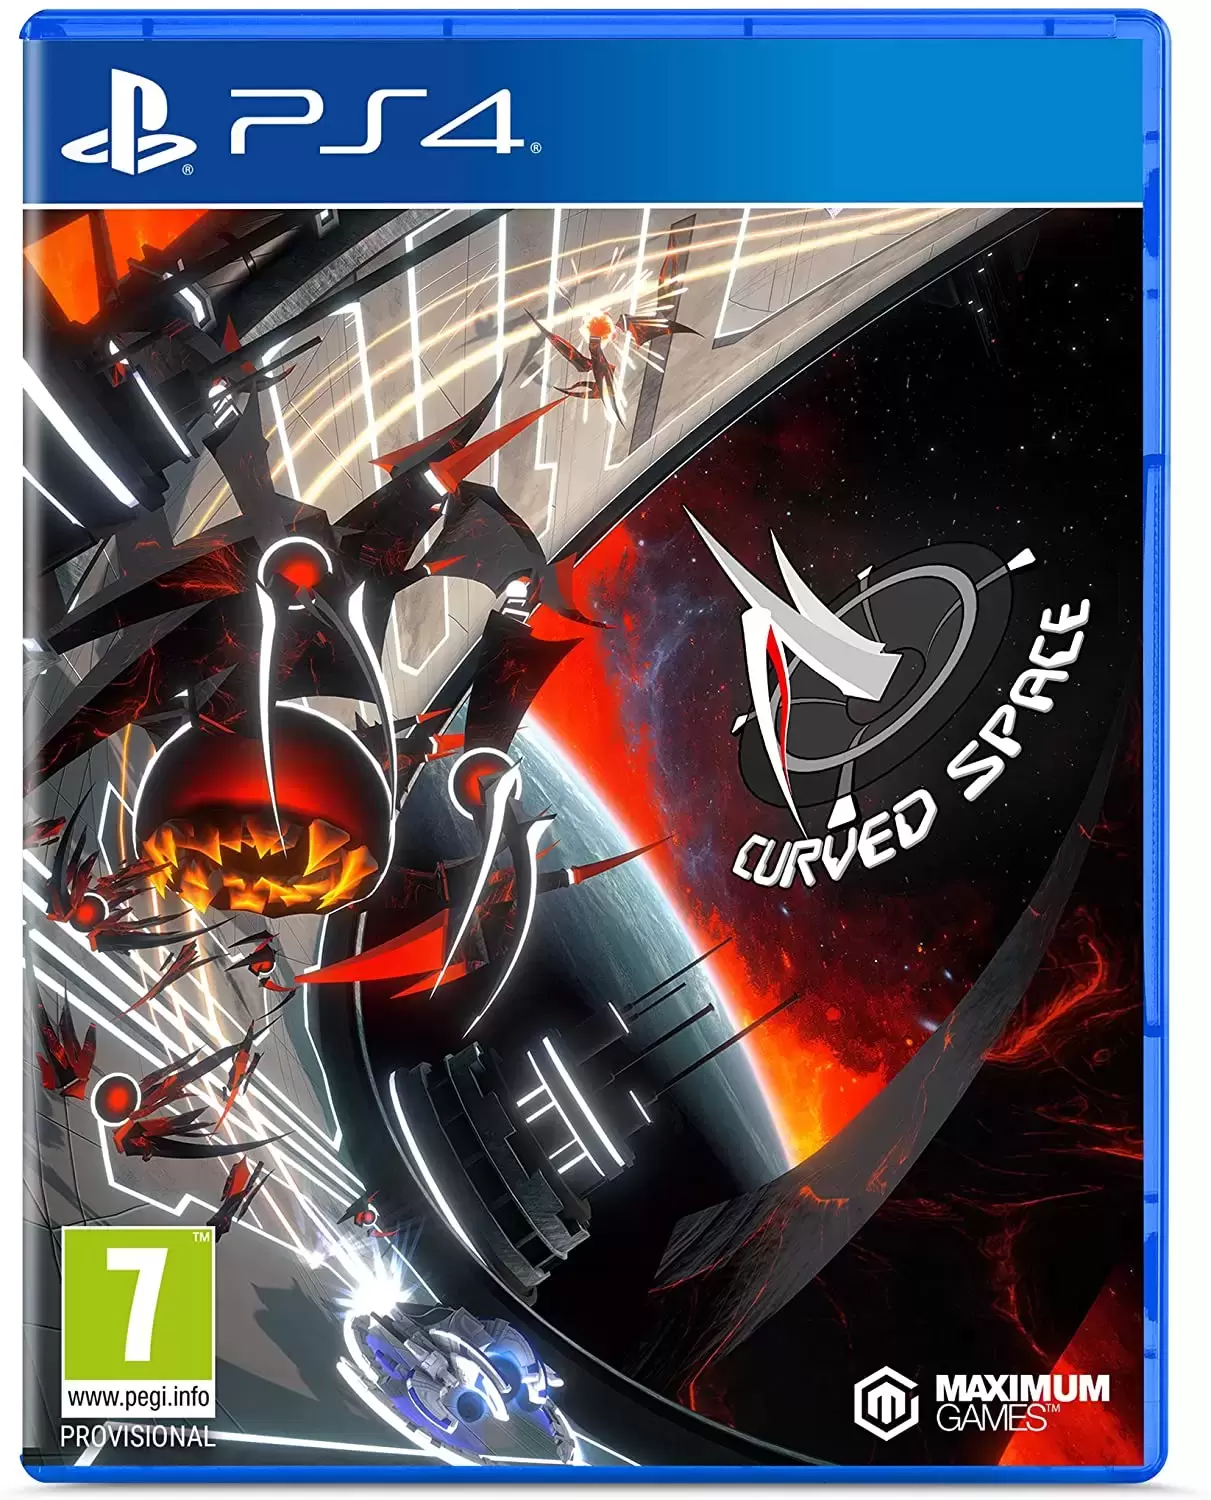 PS4 Games - Curved Space